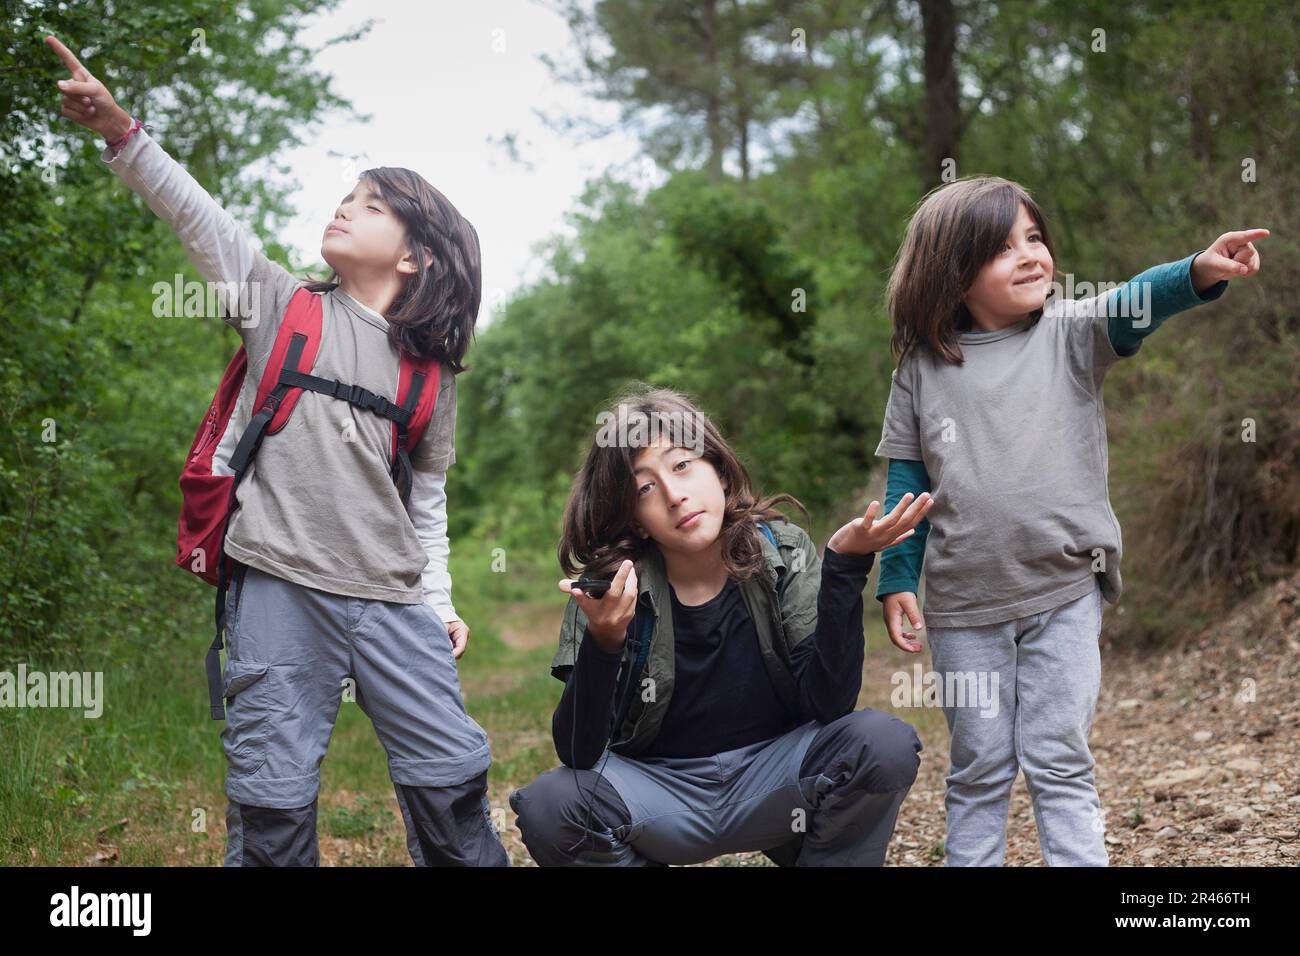 Two young siblings point in different directions, while their older brother wears an expression of uncertainty. Stock Photo